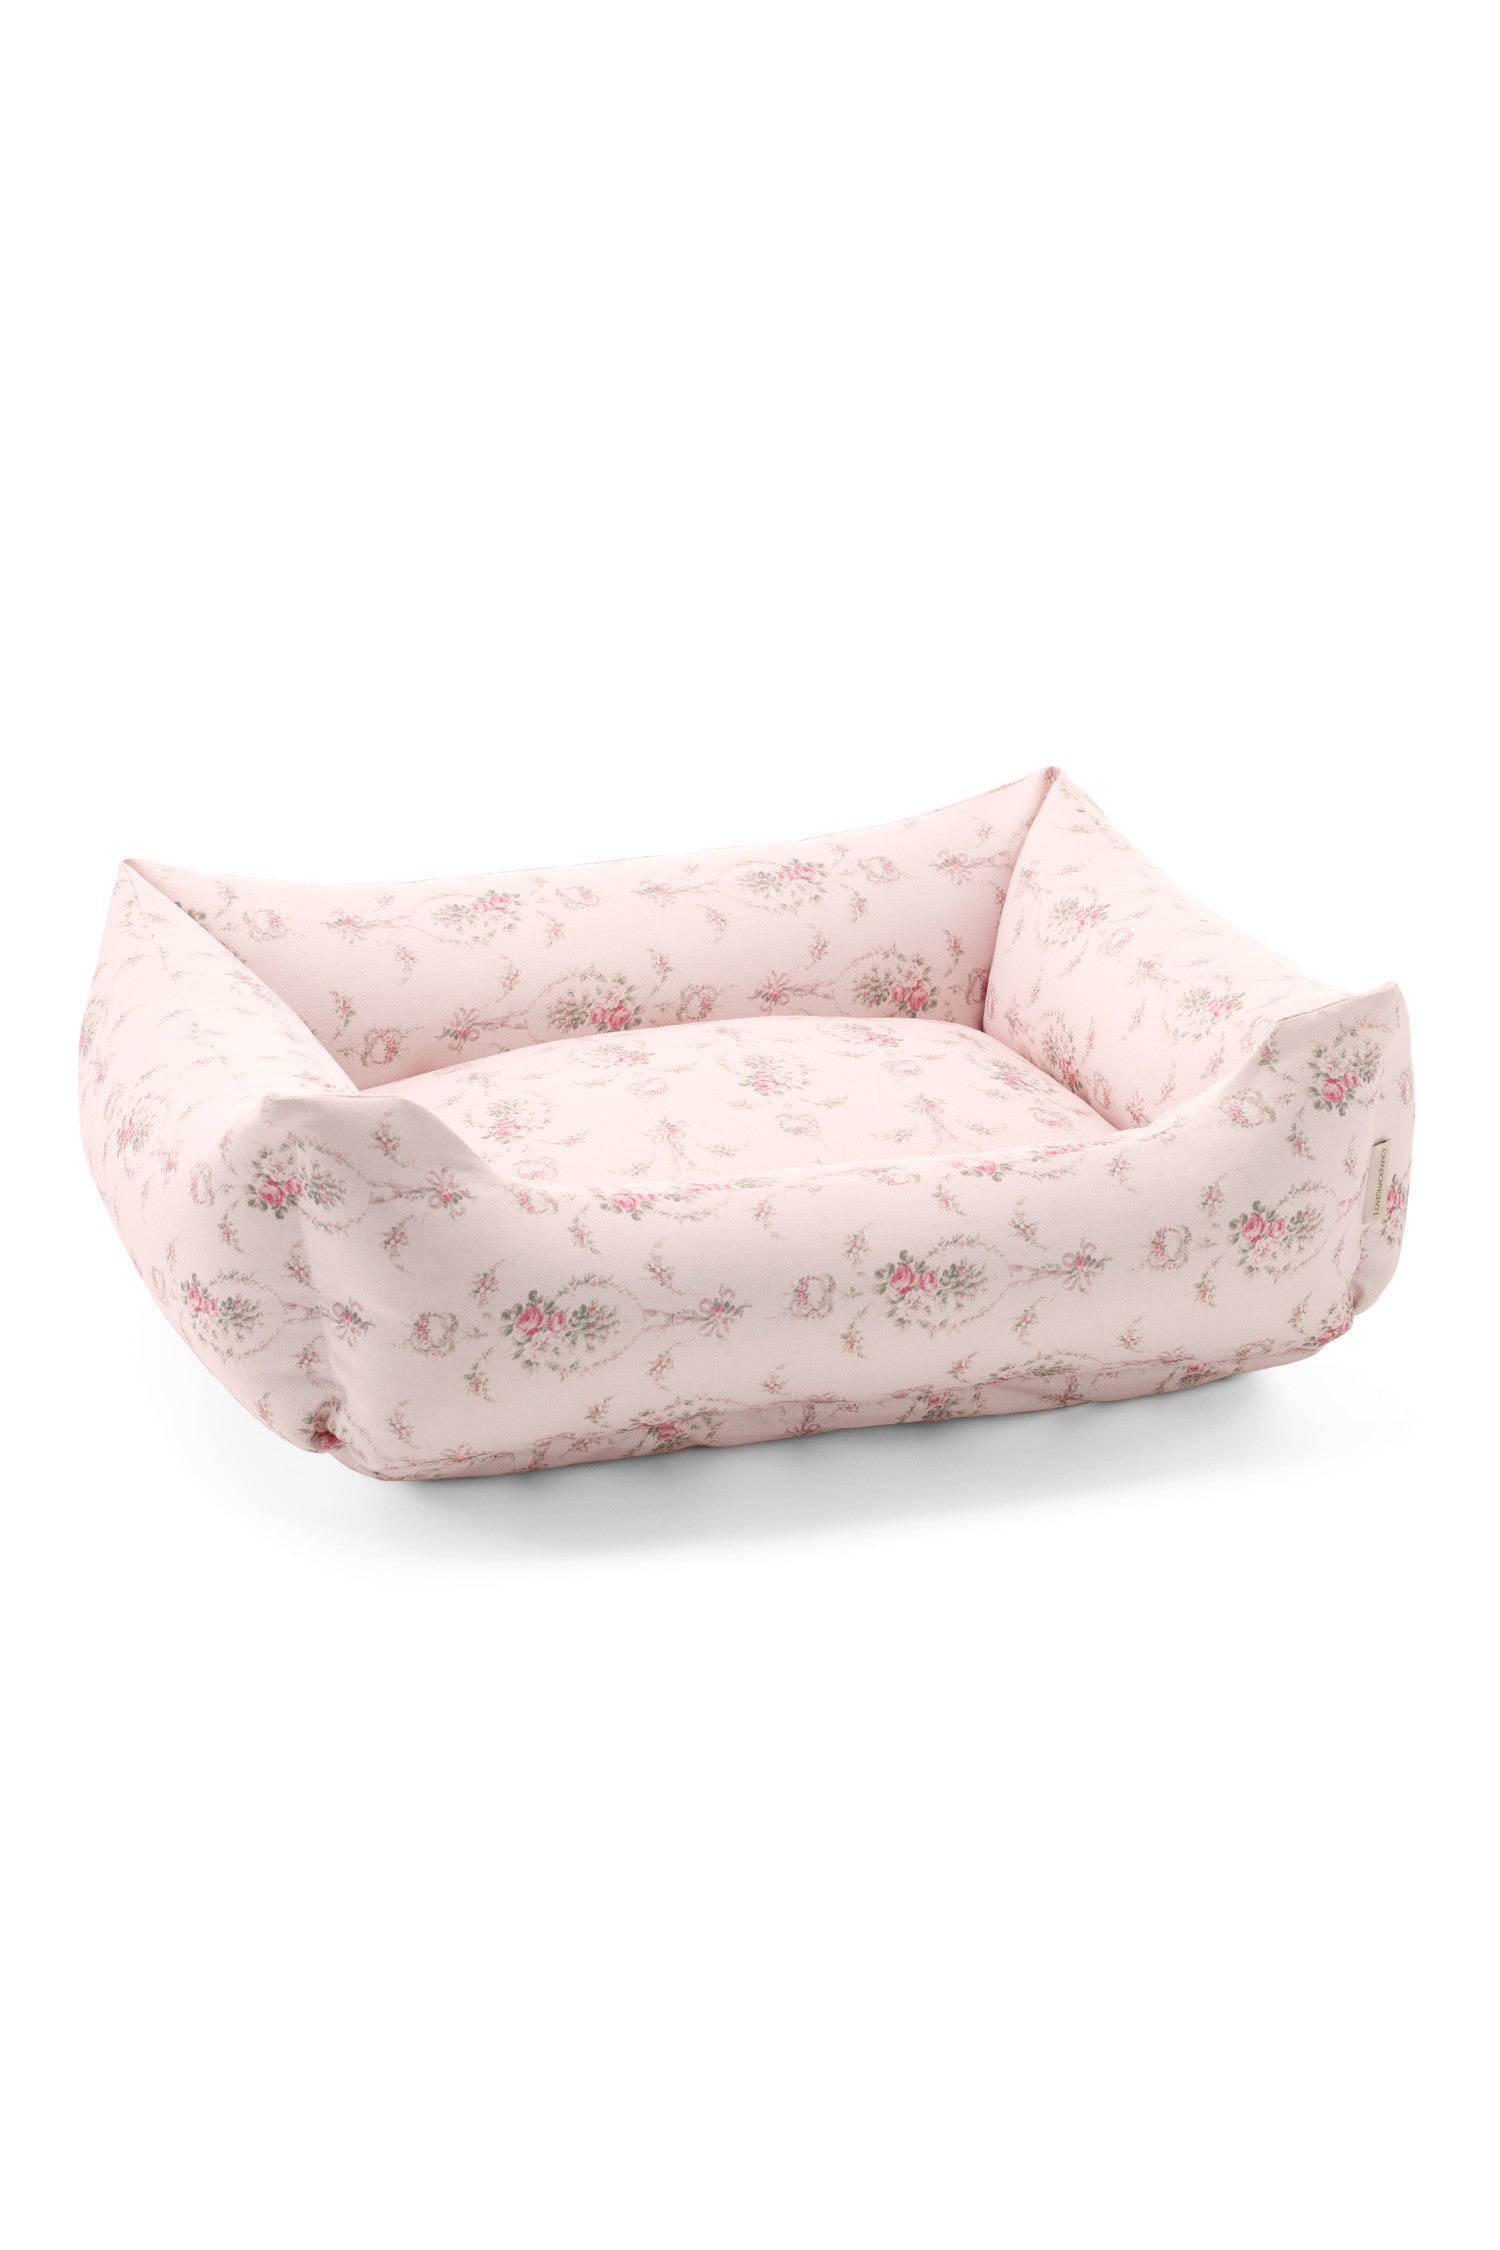 Introducing a vintage-inspired print, dog bed in a soft pink shade, crafted from high-quality linen